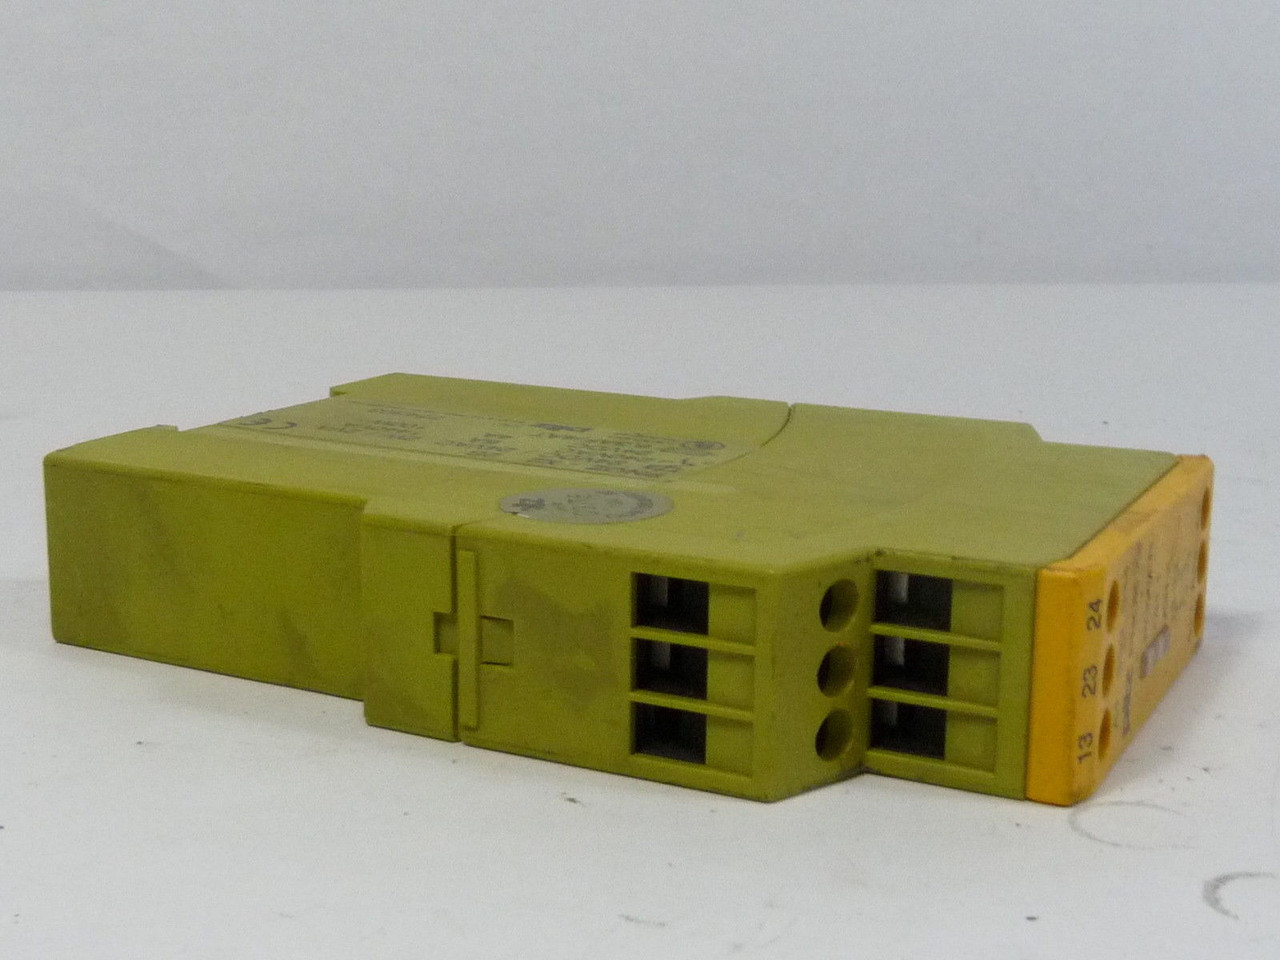 PILZ PN0Z-X2 2S Safety Relay 24VDC/VAC 6A USED